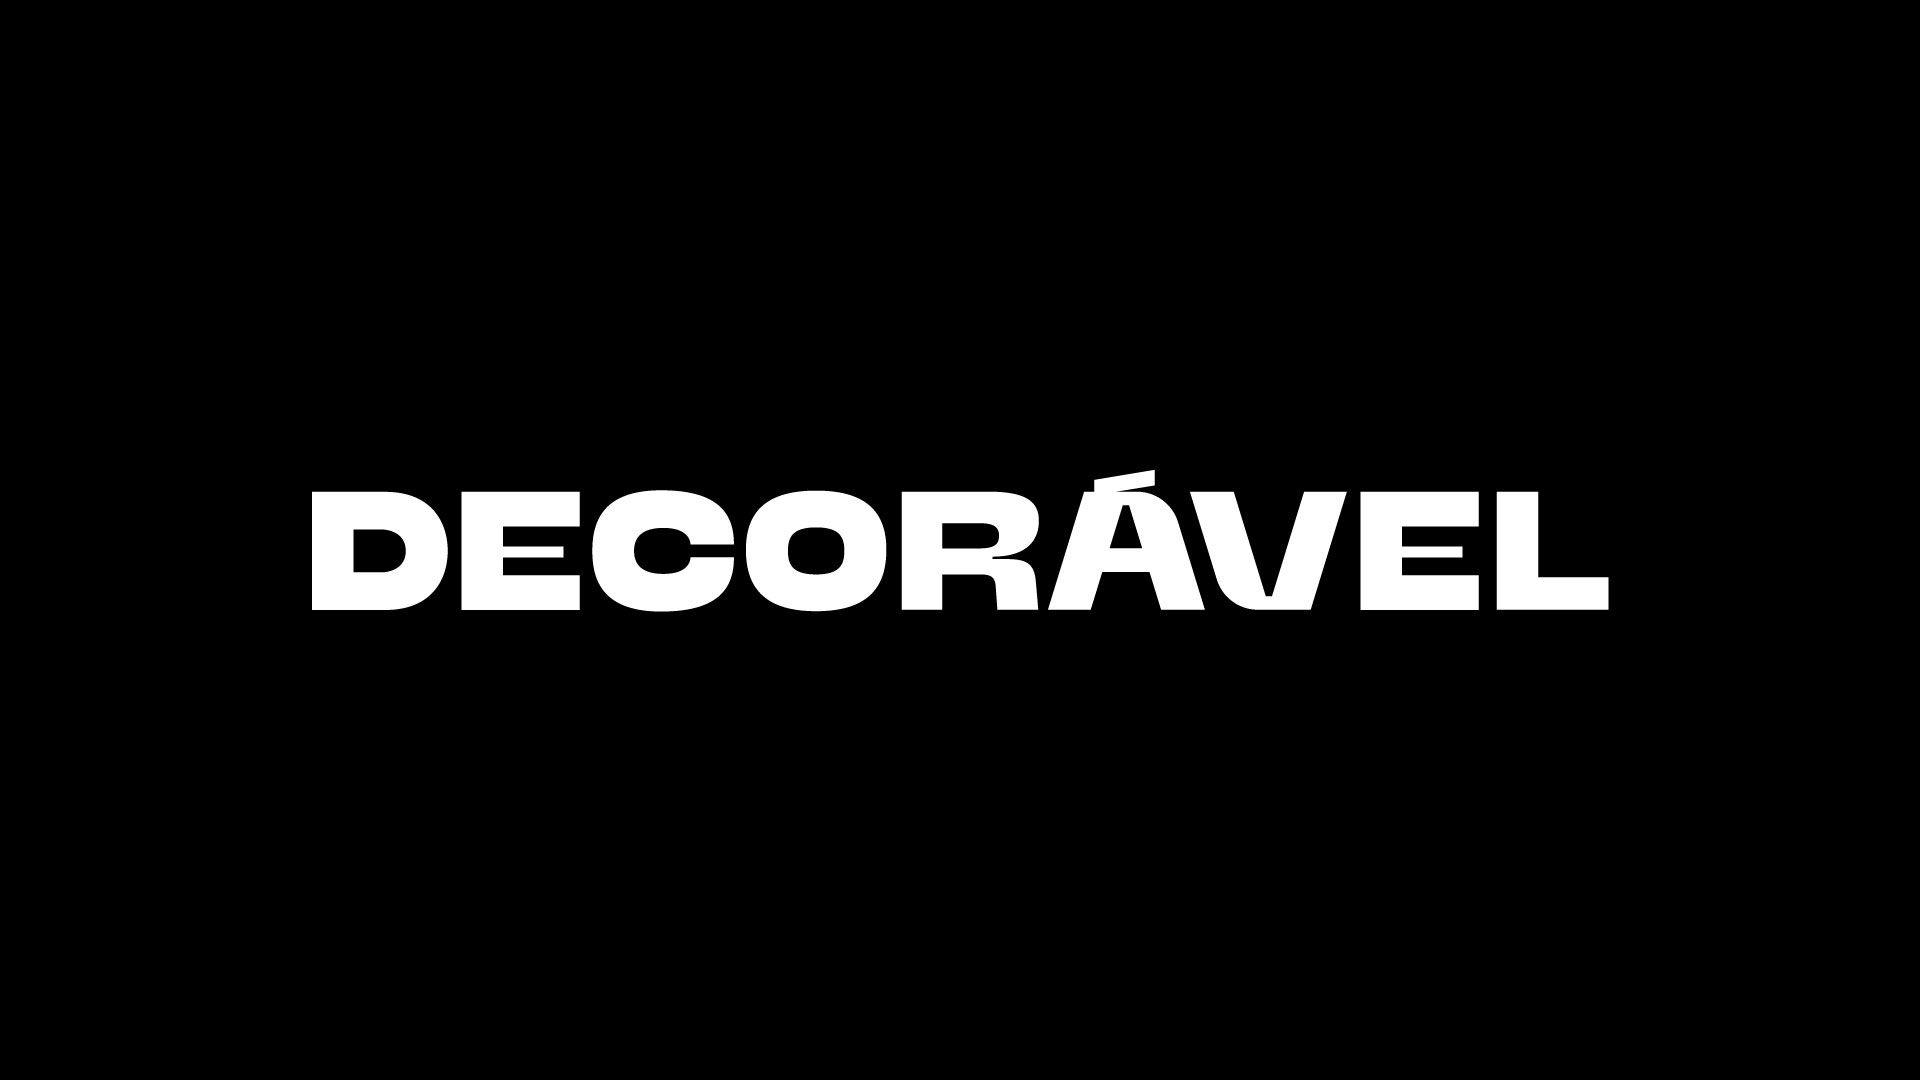 Decorável Branding and Collaterals - Ave Design